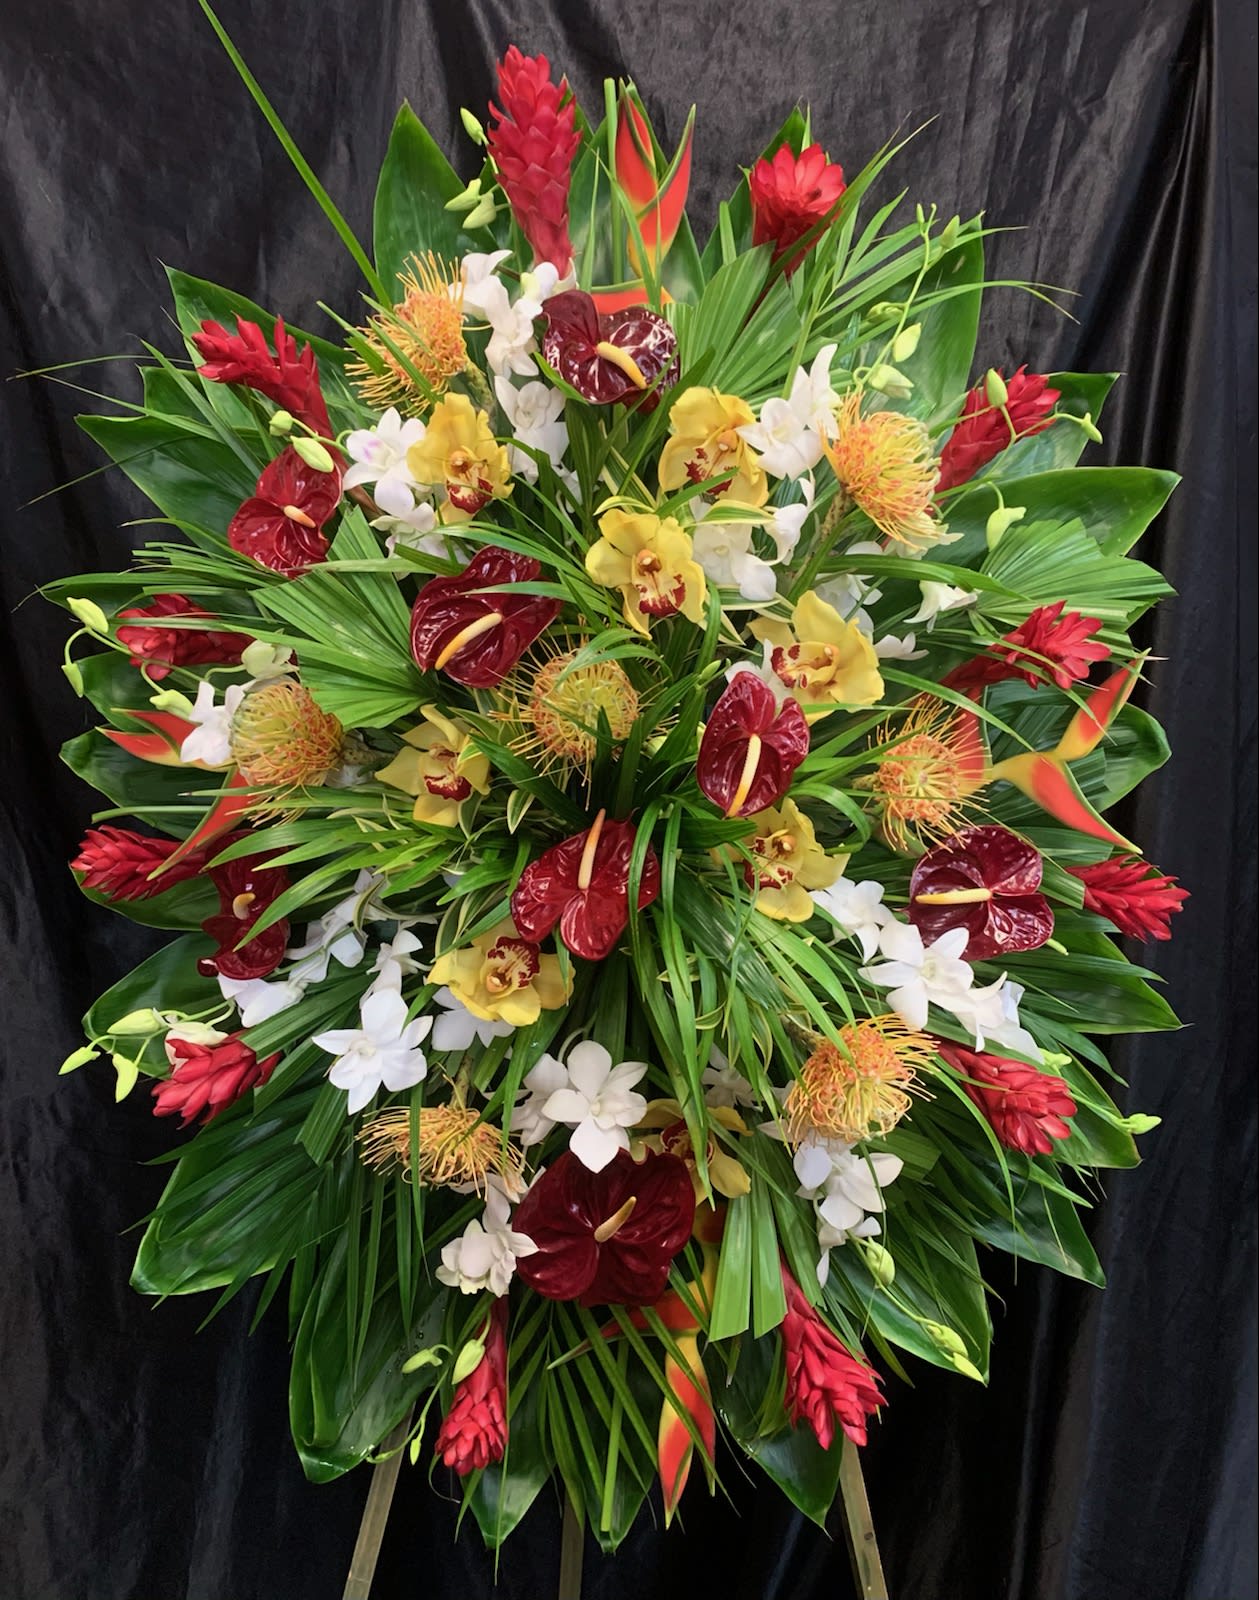 LARGE SIZED  3 1/2' X 4'  DELUXE STANDING SPRAY  L #1A - similar as shown: Red ginger, anthurium,  protea, cymbidium + dendrobium orchid, heleconia, foliage  